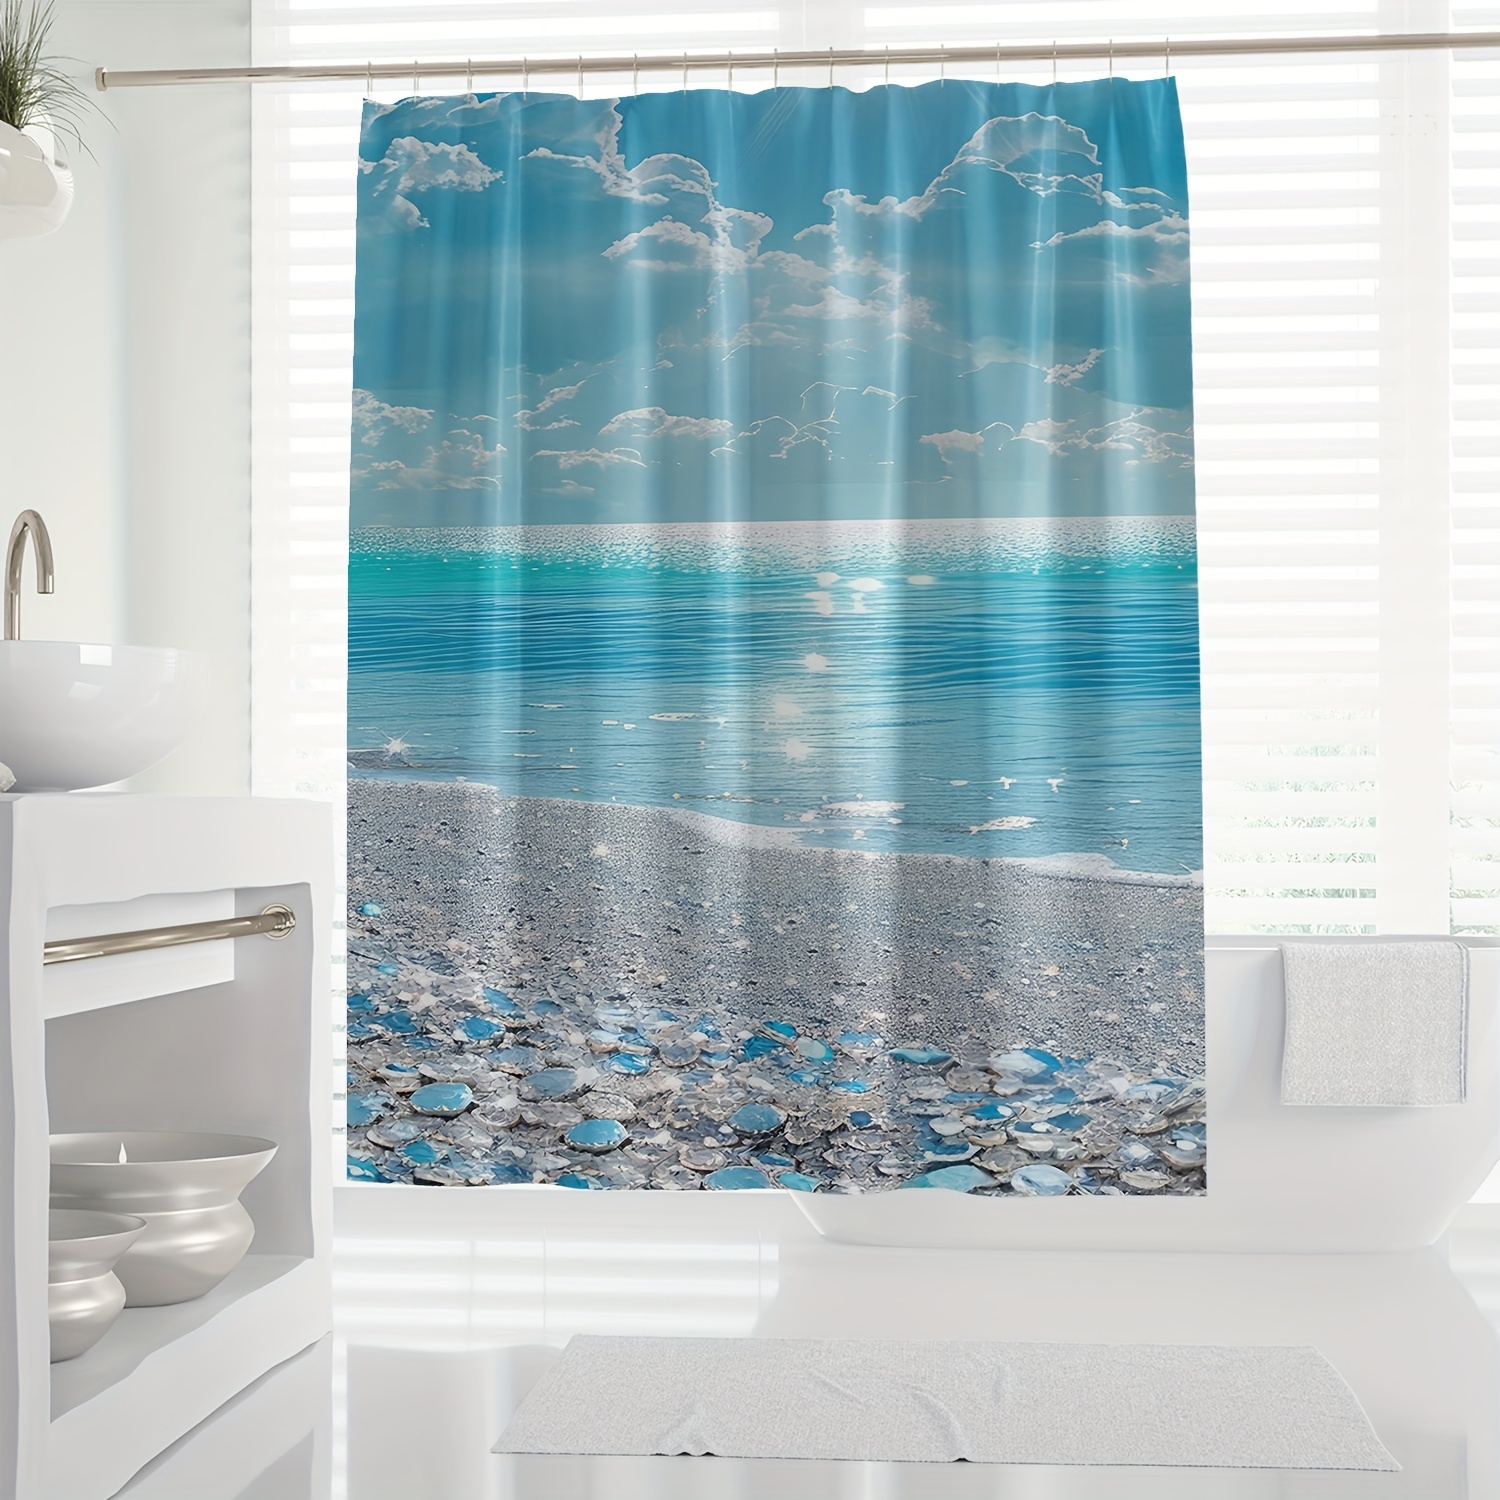 

1pc Modern Digital Print Shower Curtain - Blue Ocean Tranquil Scenery, Water-resistant Polyester With Knit Weave, Machine Washable With Hooks Included - Arts Theme For All Seasons.